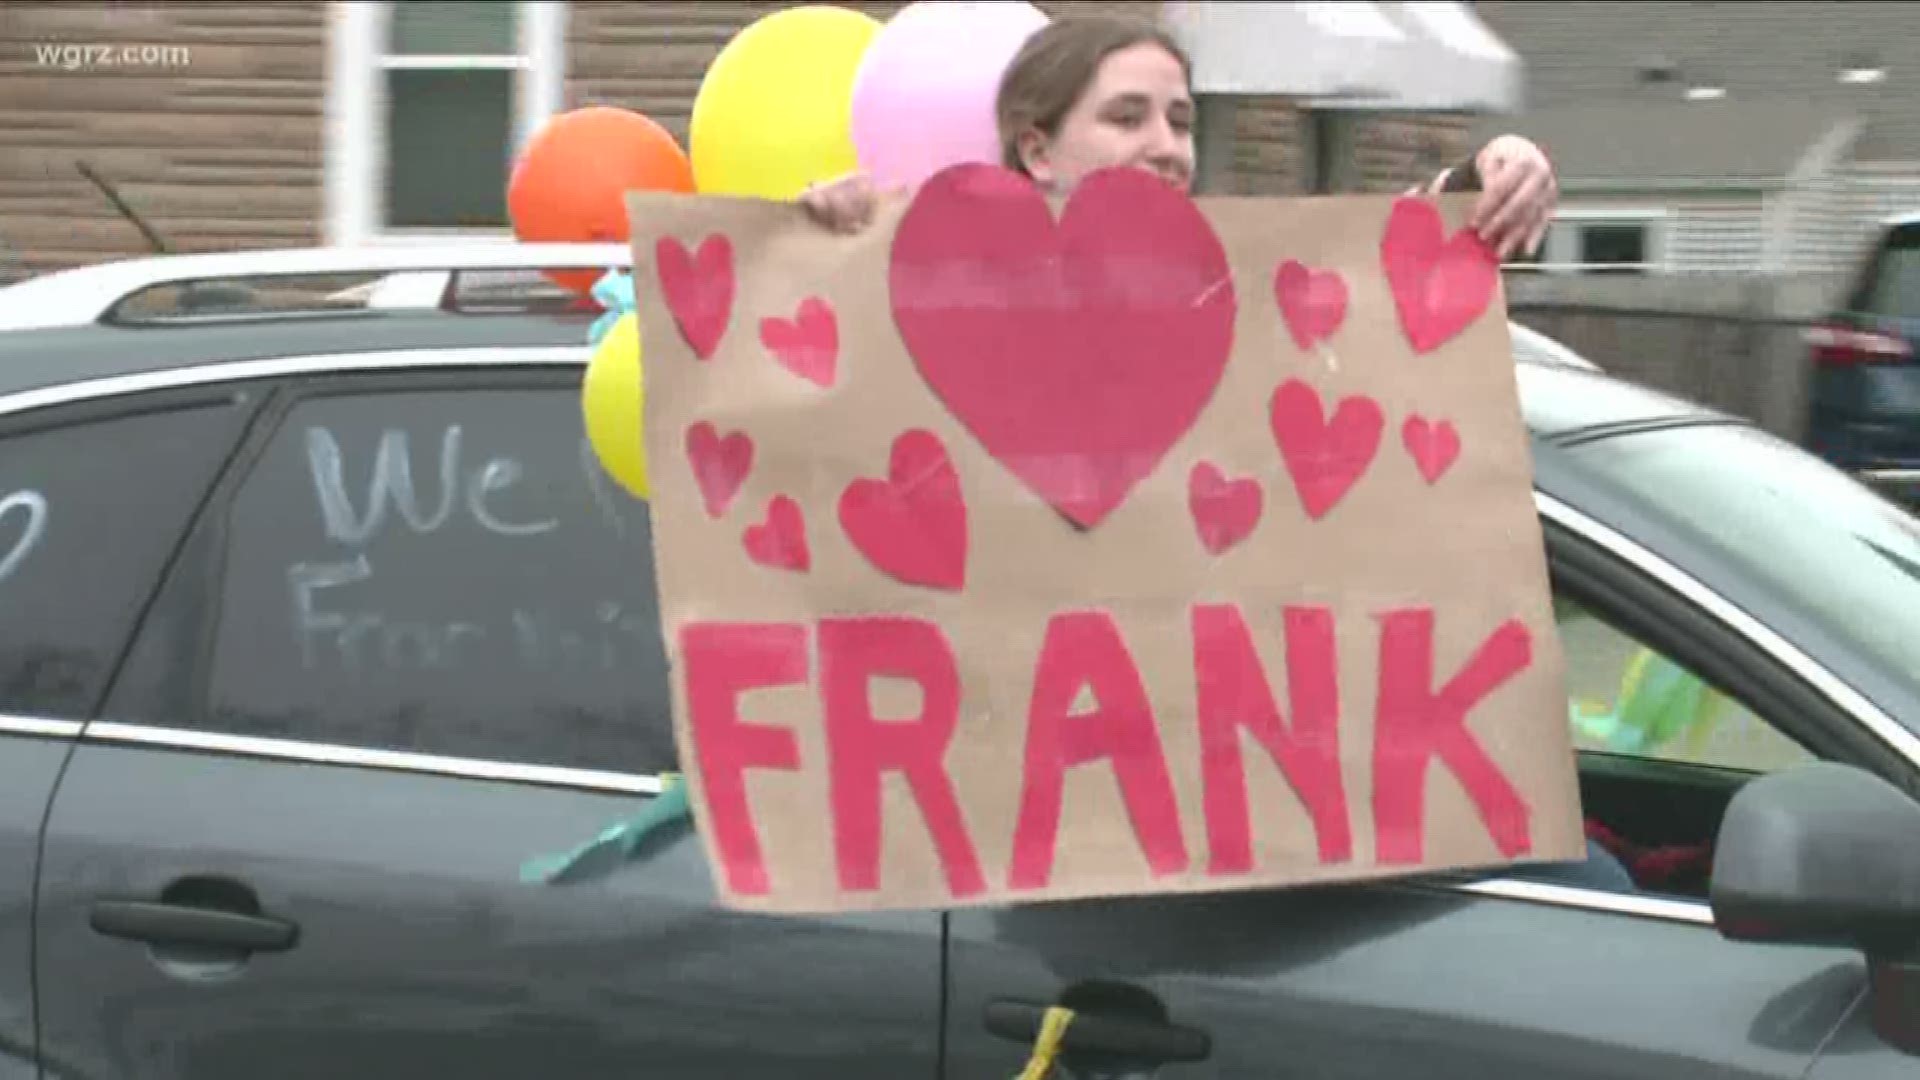 A parade wad held in Cheektowaga earlier tonight for Frank Caruana. Organizers say he's dealing with liver failure and can't have visitors come see him.